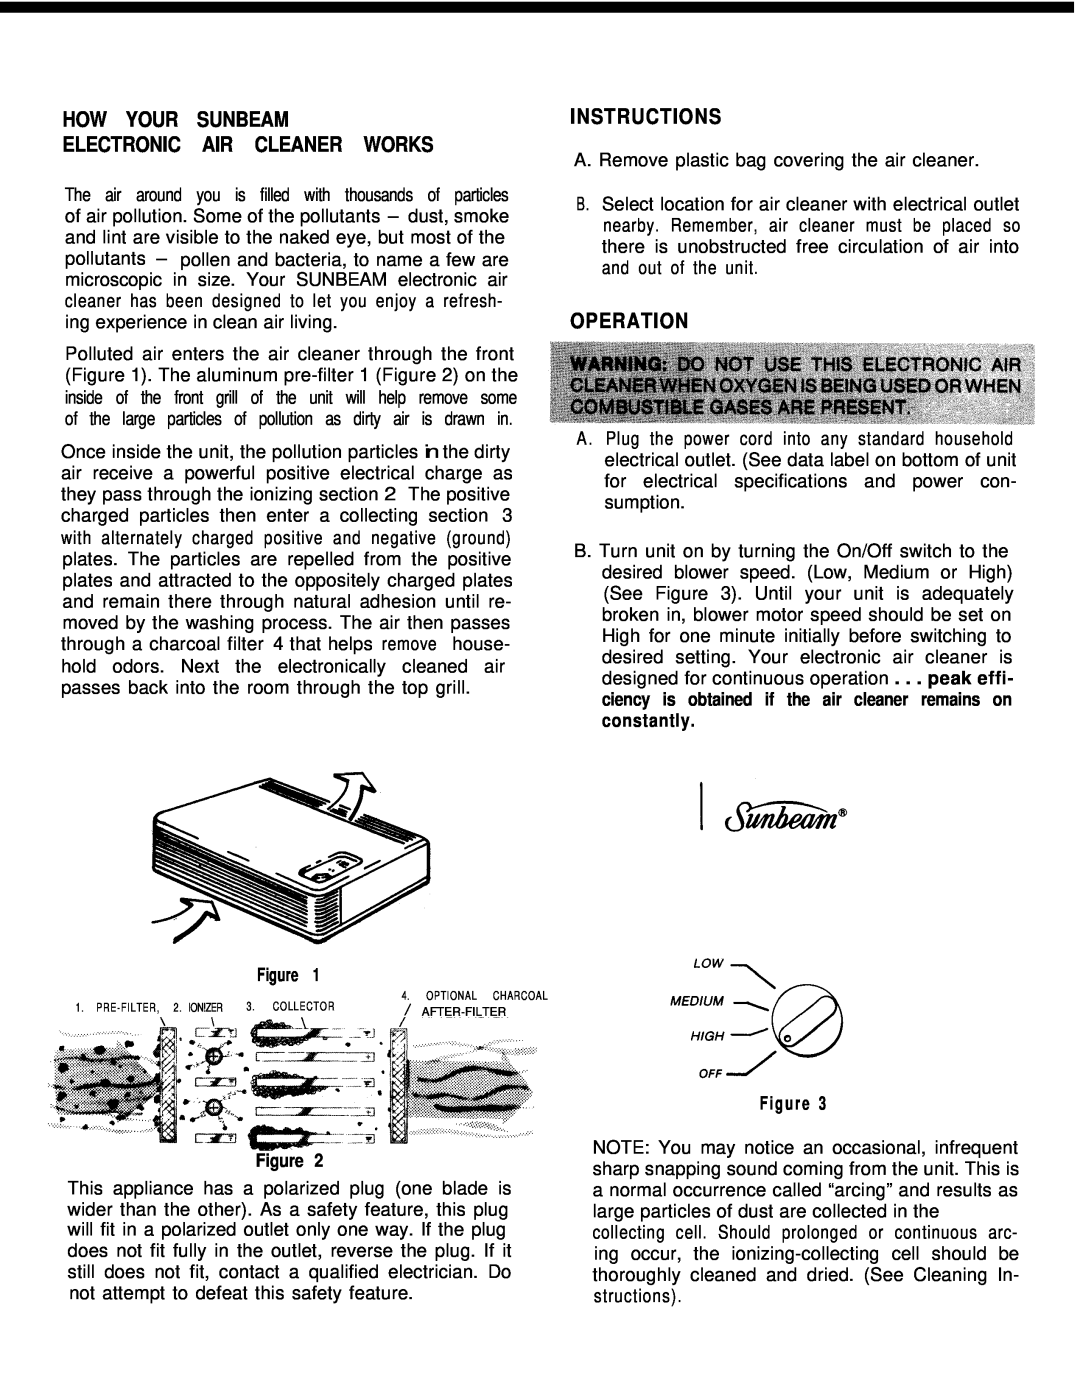 Sunbeam 2585 manual How Your Sunbeam Electronic Air Cleaner Works, Instructions, Operation 